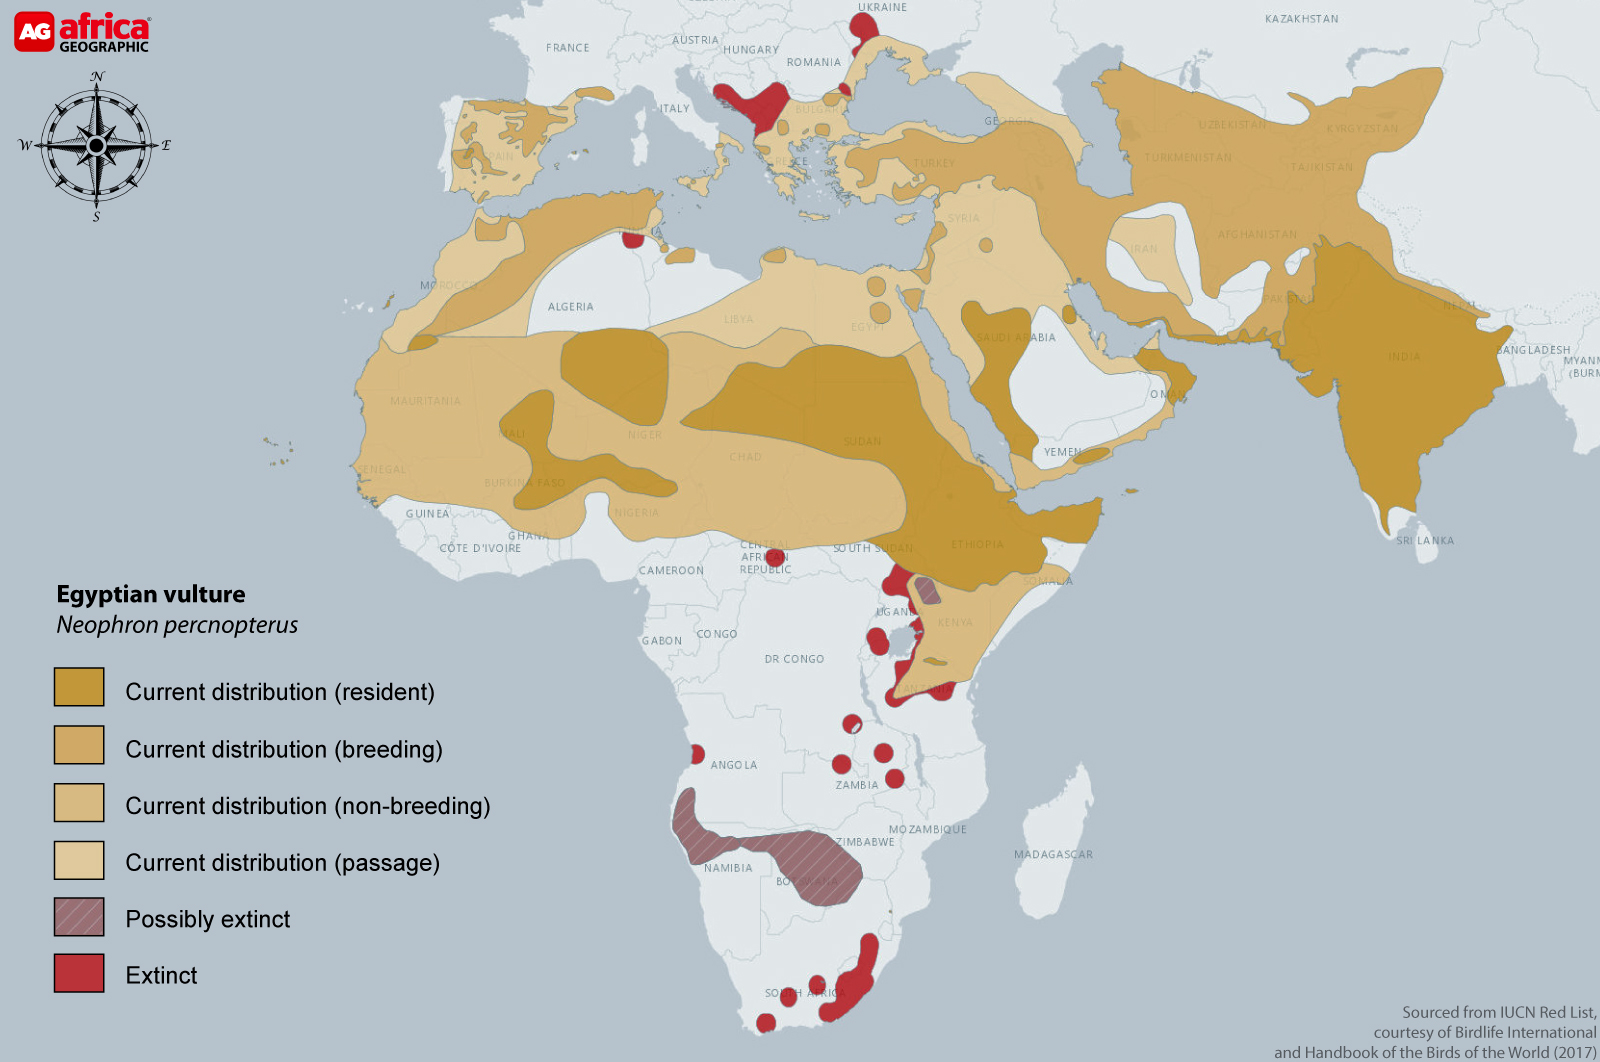 Distribution map of Egyptian vulture